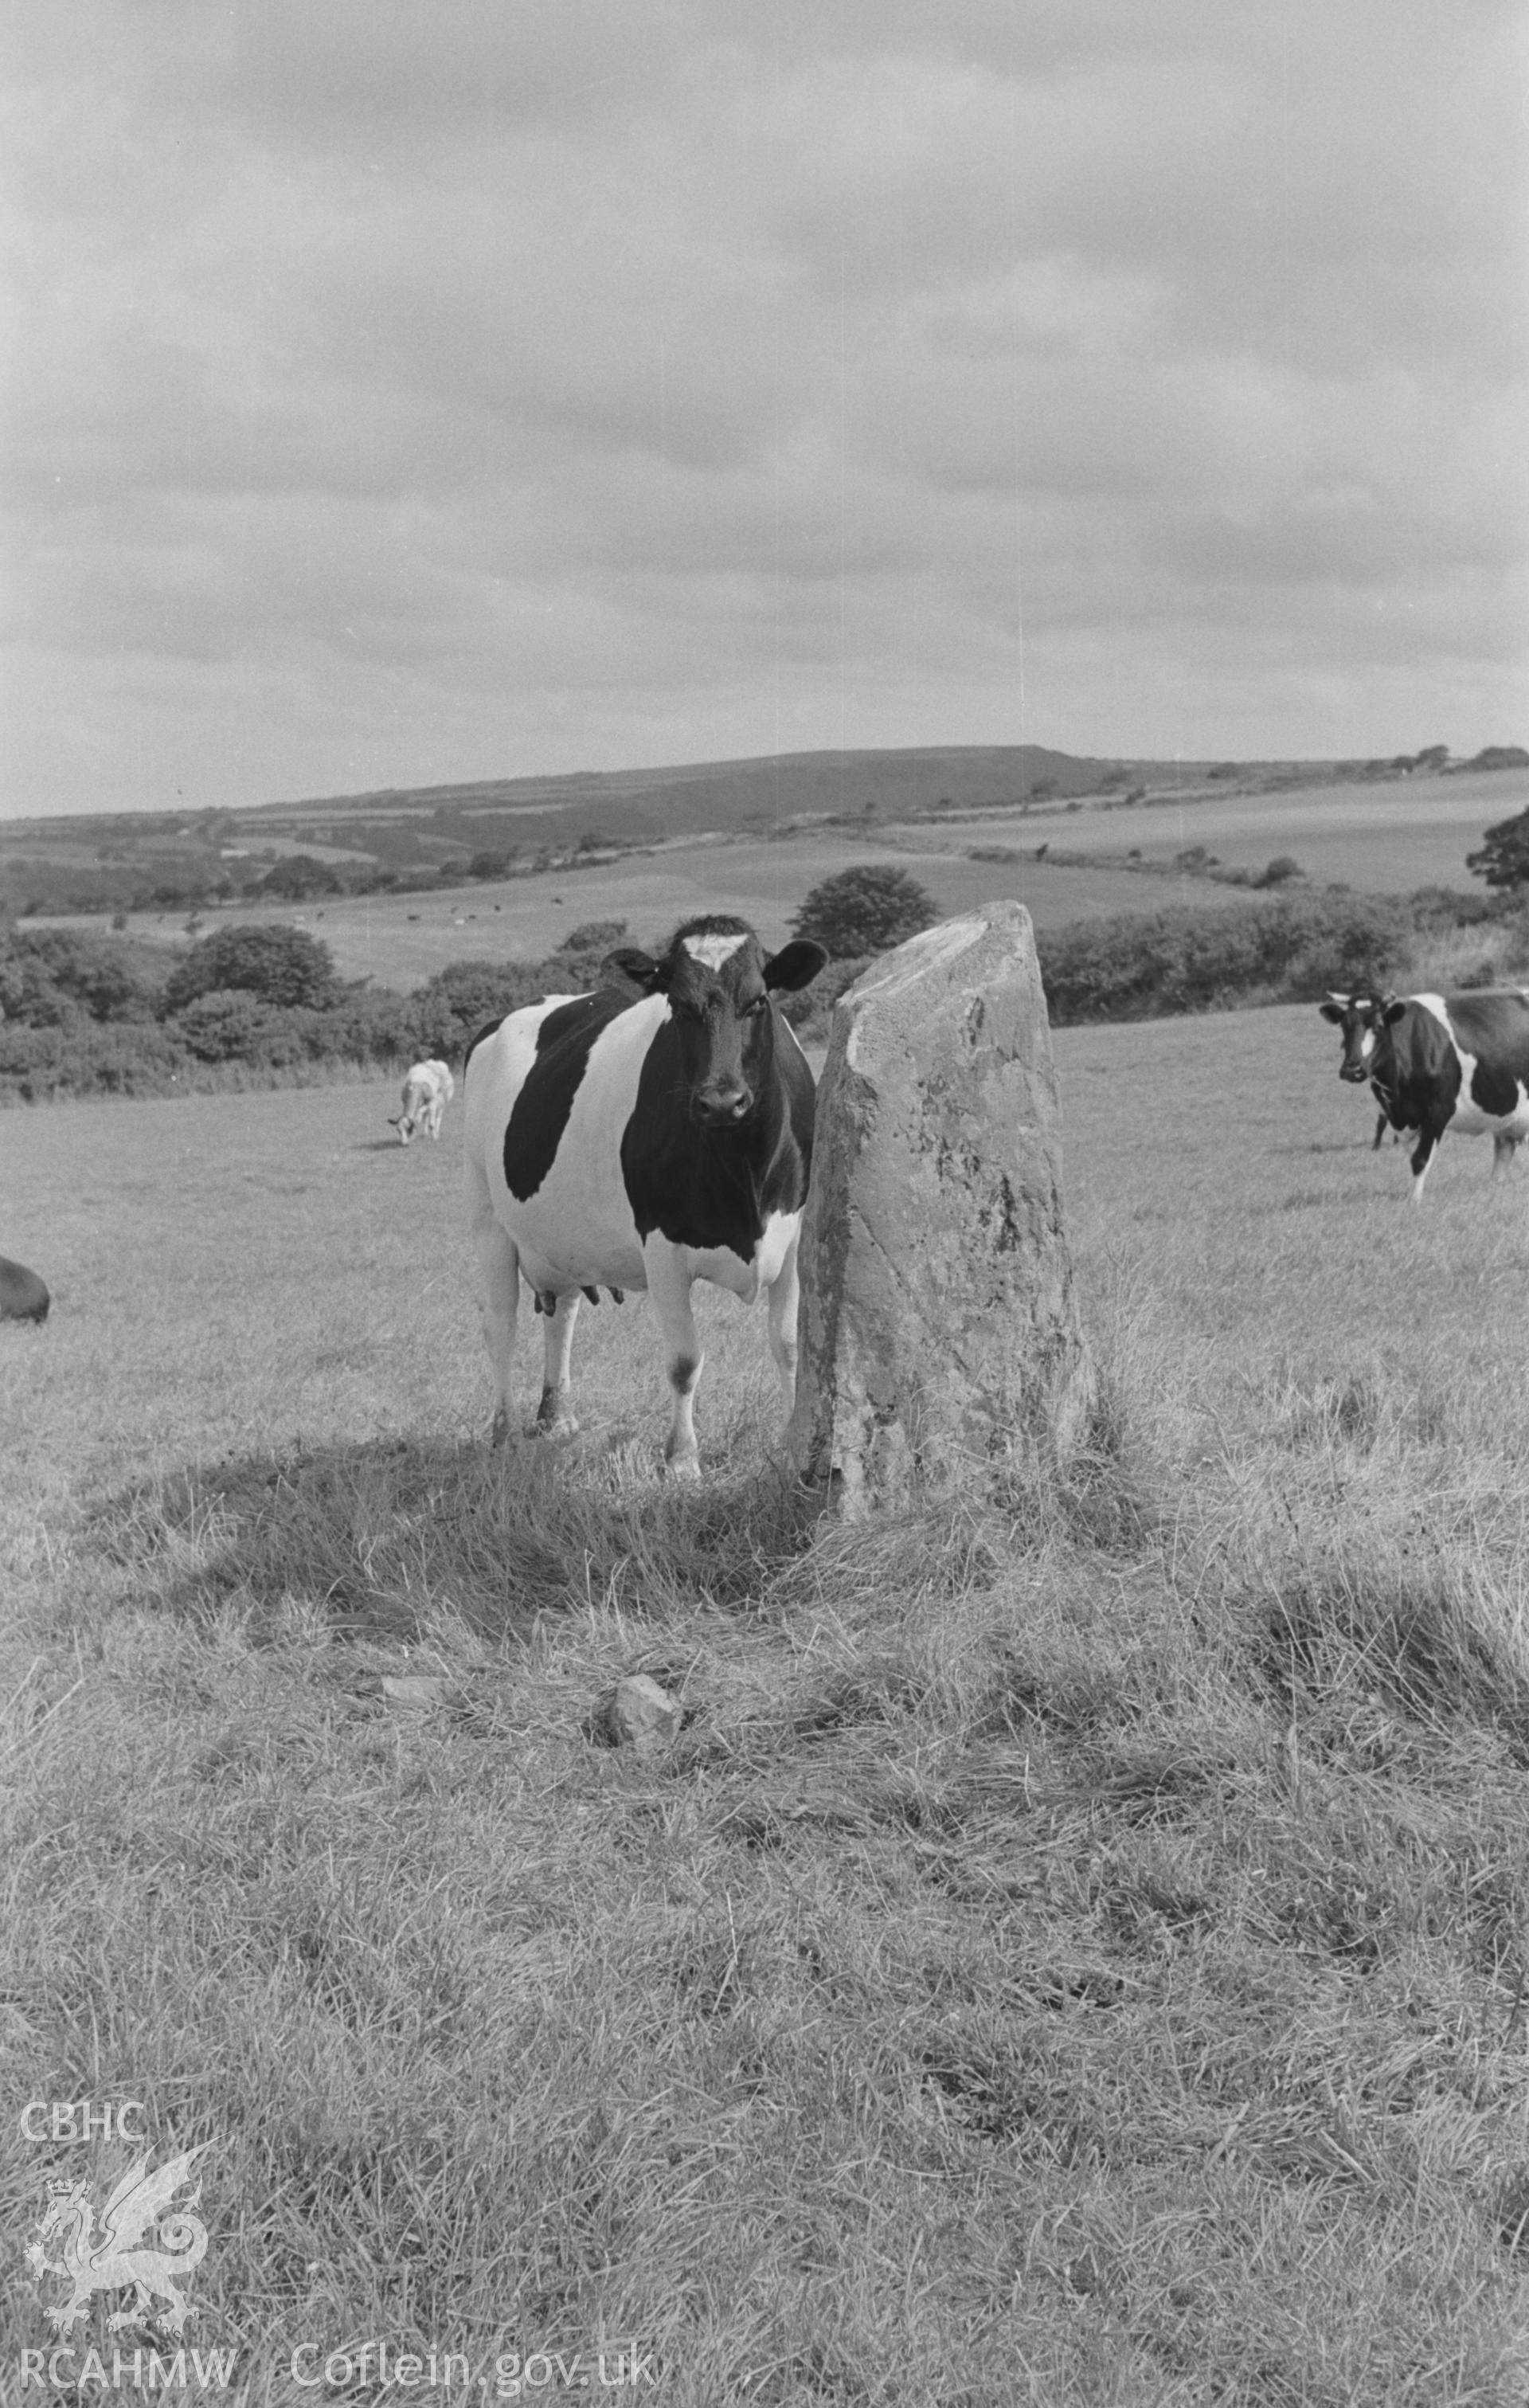 Digital copy of a black and white negative showing the Corbalengi stone with cows. Photographed in August 1963 by Arthur O. Chater from Grid Reference SN 2890 5135, looking east north east.